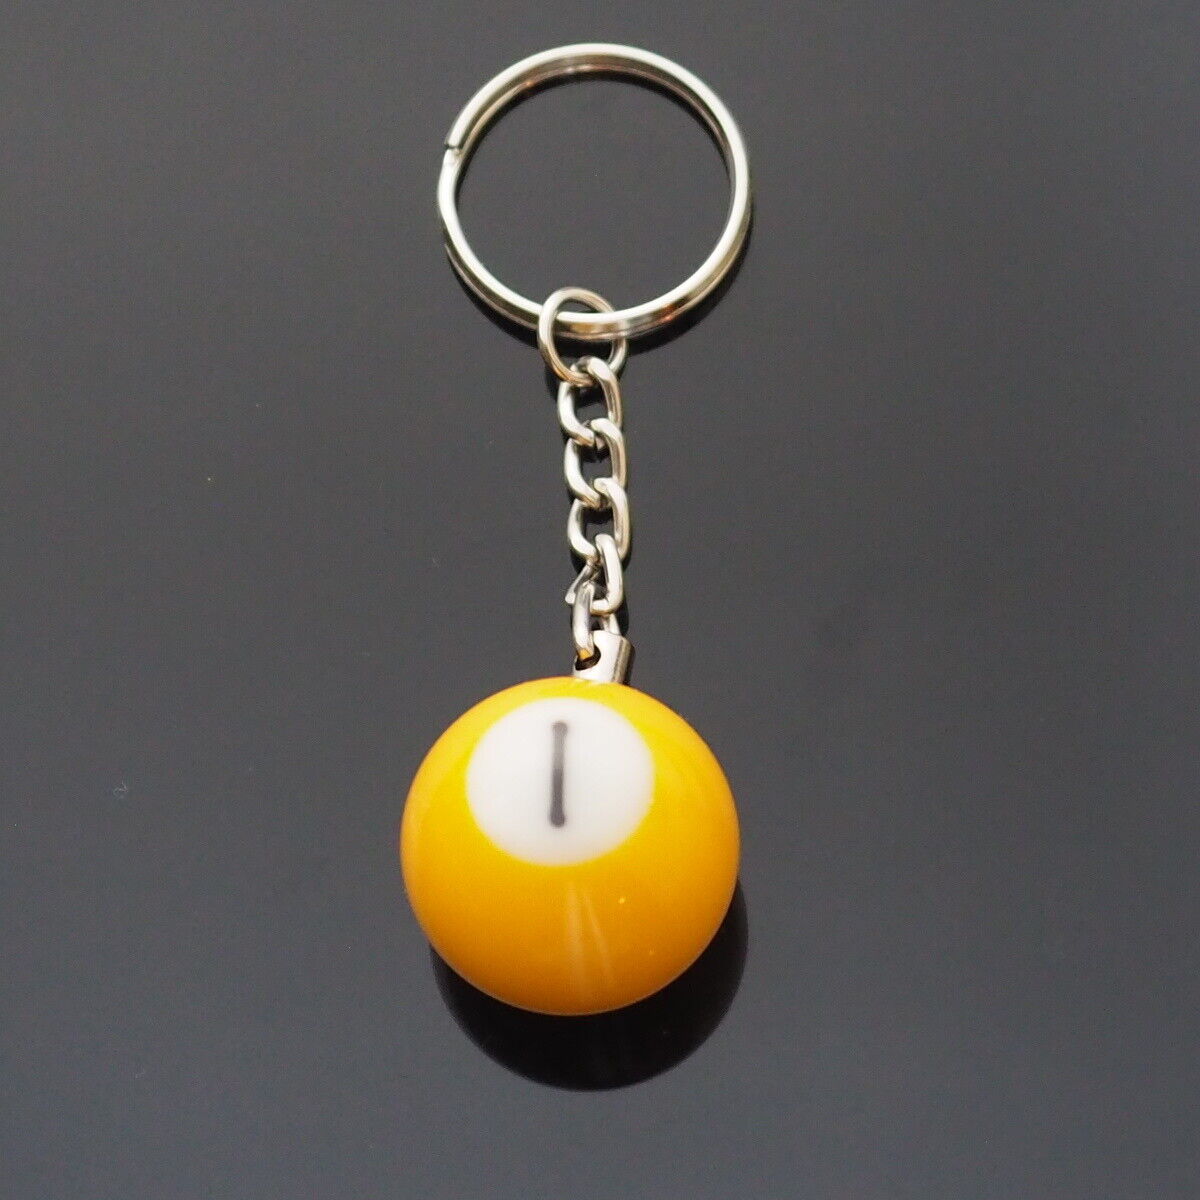 1x Billiards Table Pool Ball Keychain Cool Player Gift  - Choose Numbers 1-15 